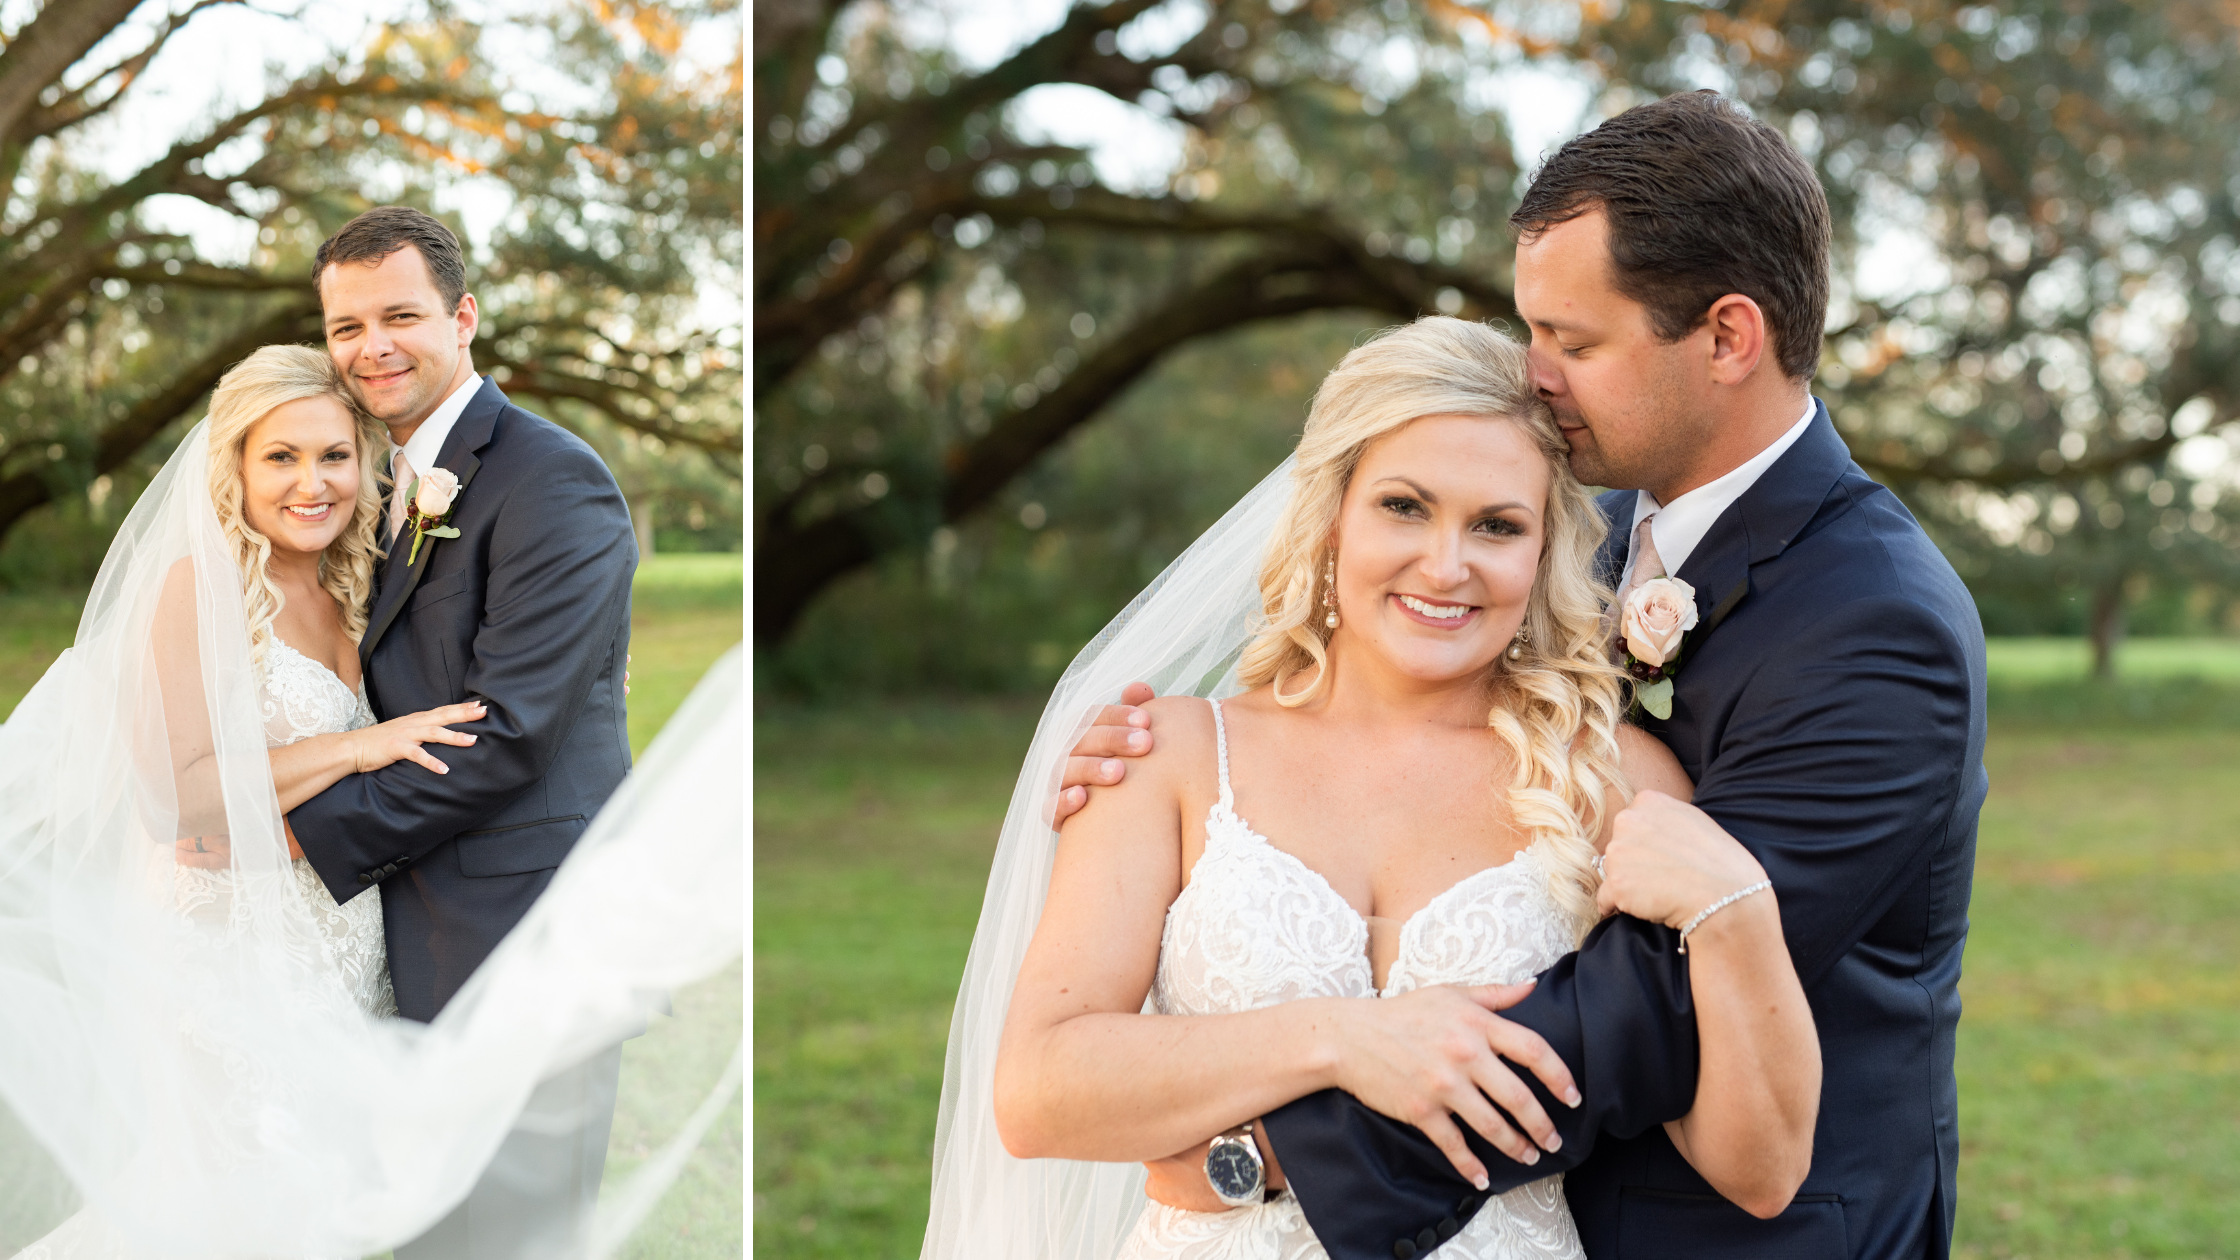 Belforest Pointe Wedding Daphne, AL Photographed by Kristen Marcus Photography